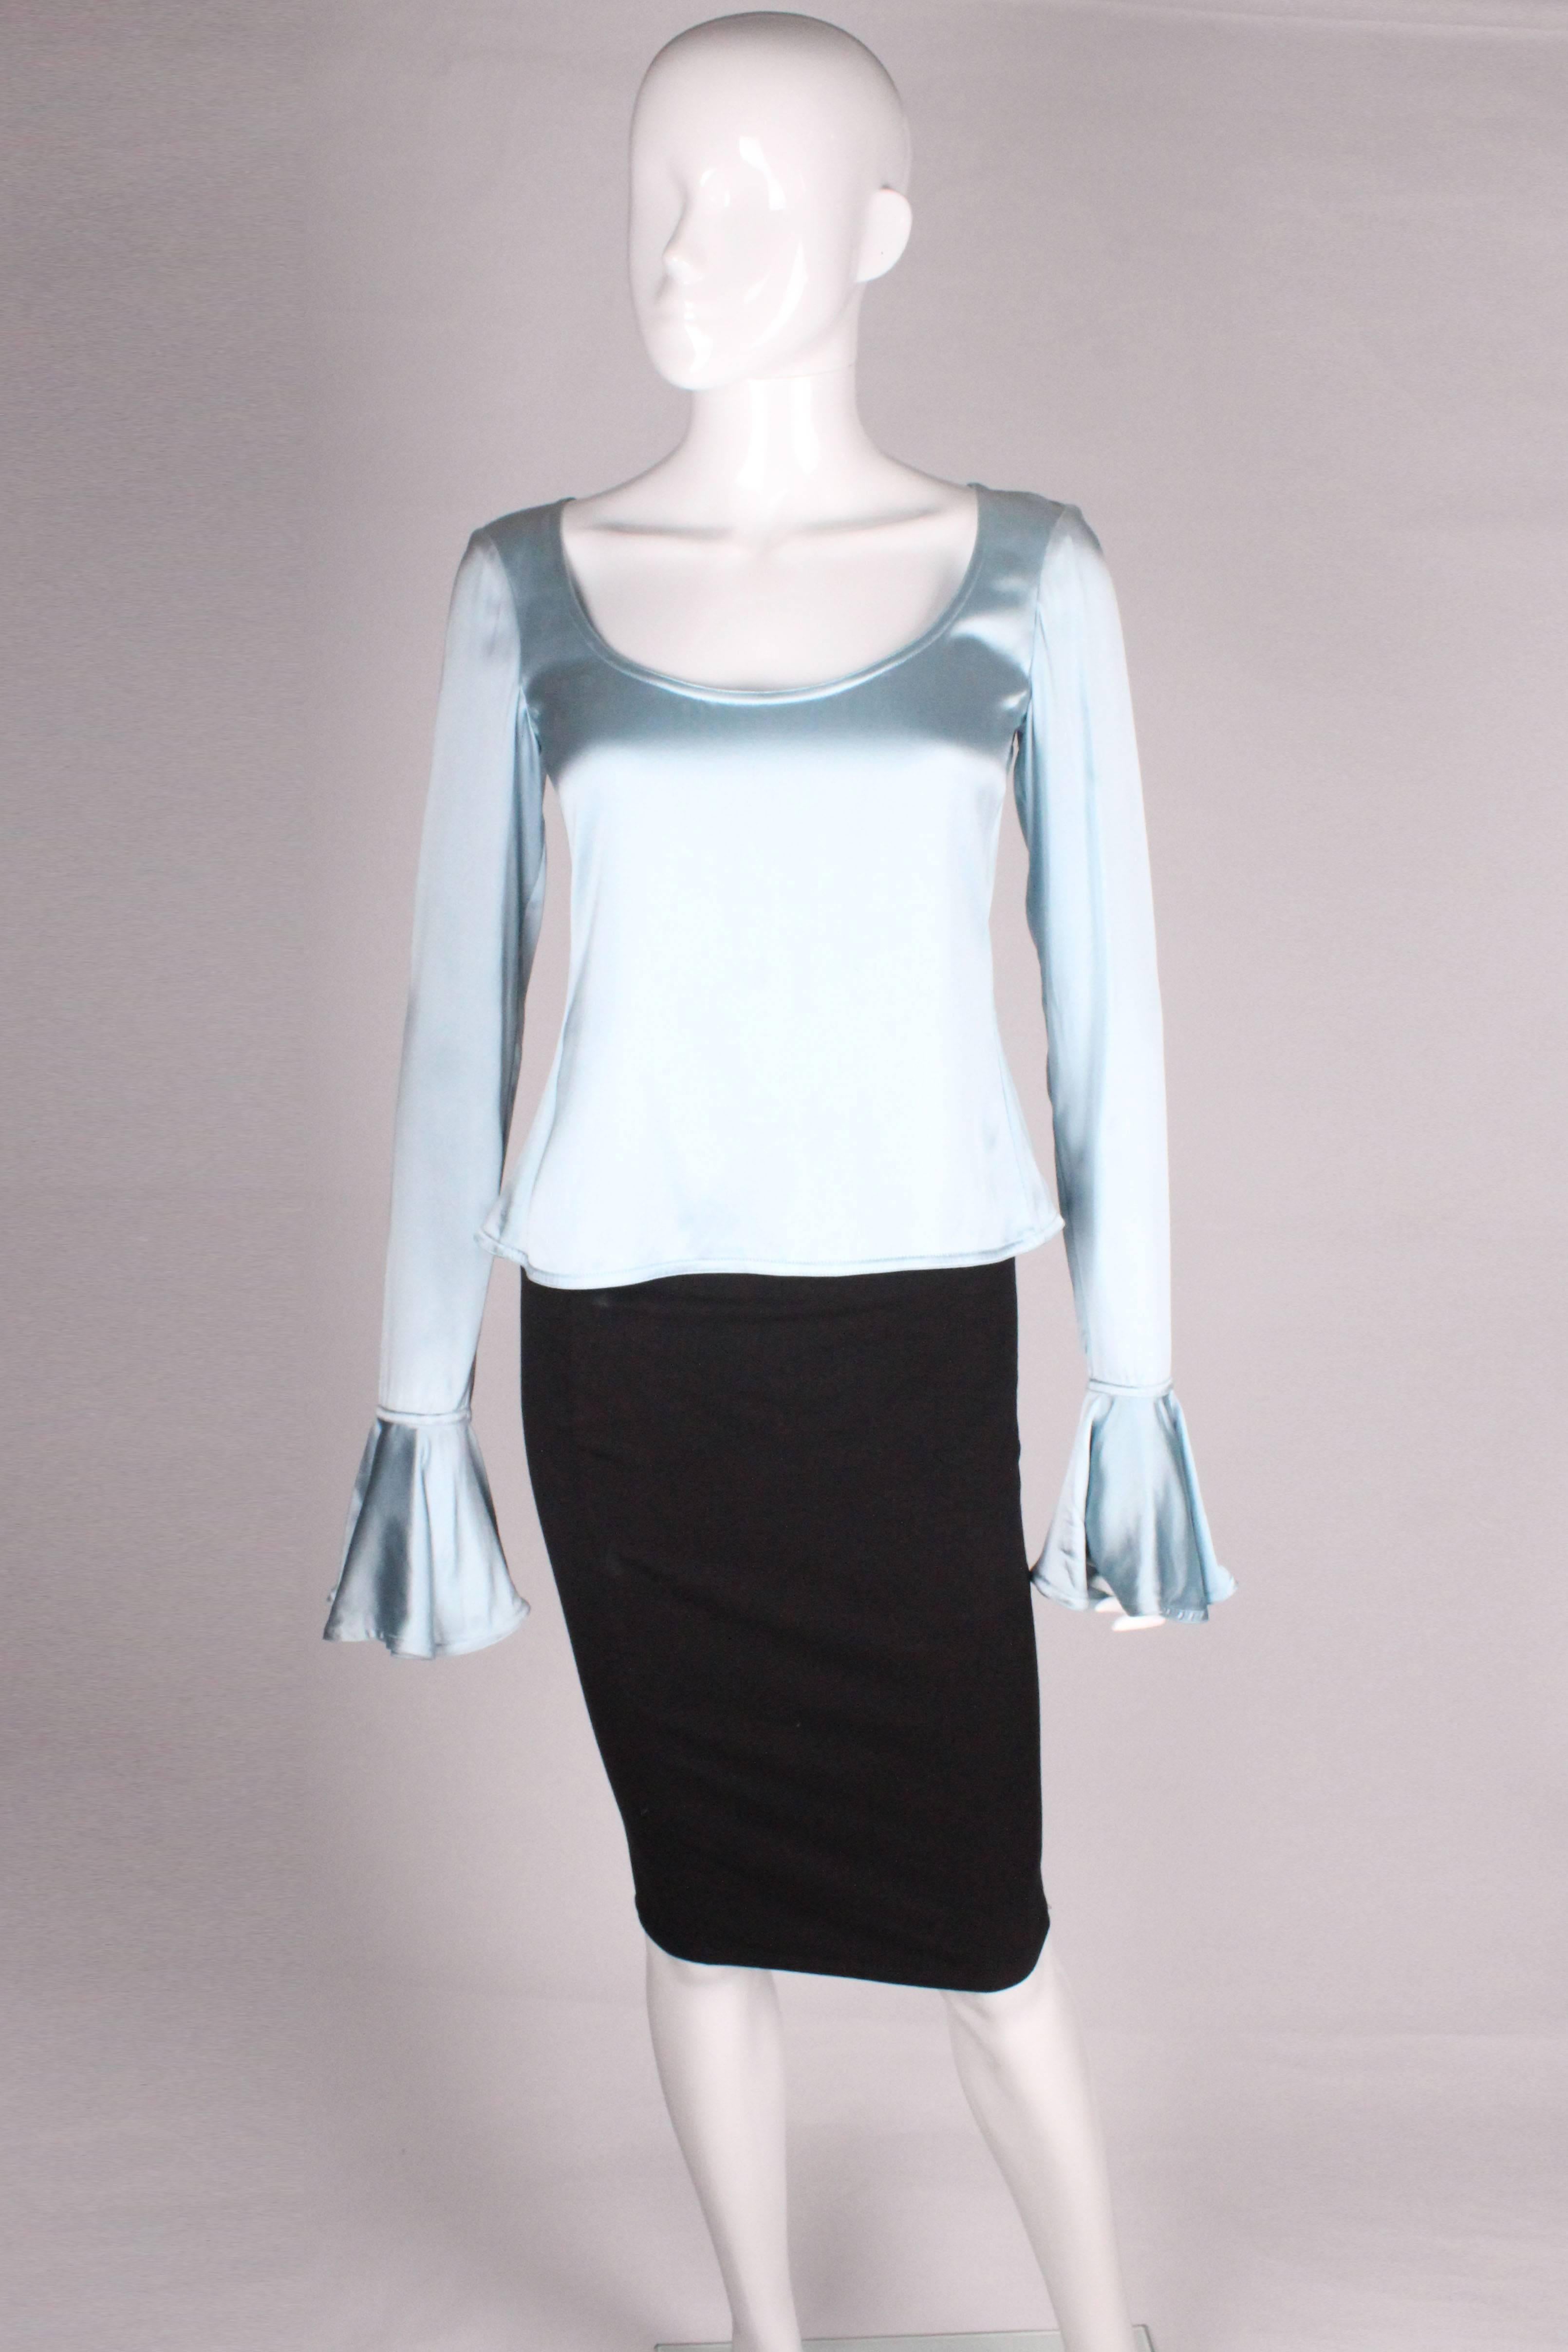 A chic top by French design house, Yves Saint Laurent, Rive Gauche line.
In an ice blue silk , the top has a deep neckline, long sleeves with wonderful frilled cuffs and a central zip opening at the back.